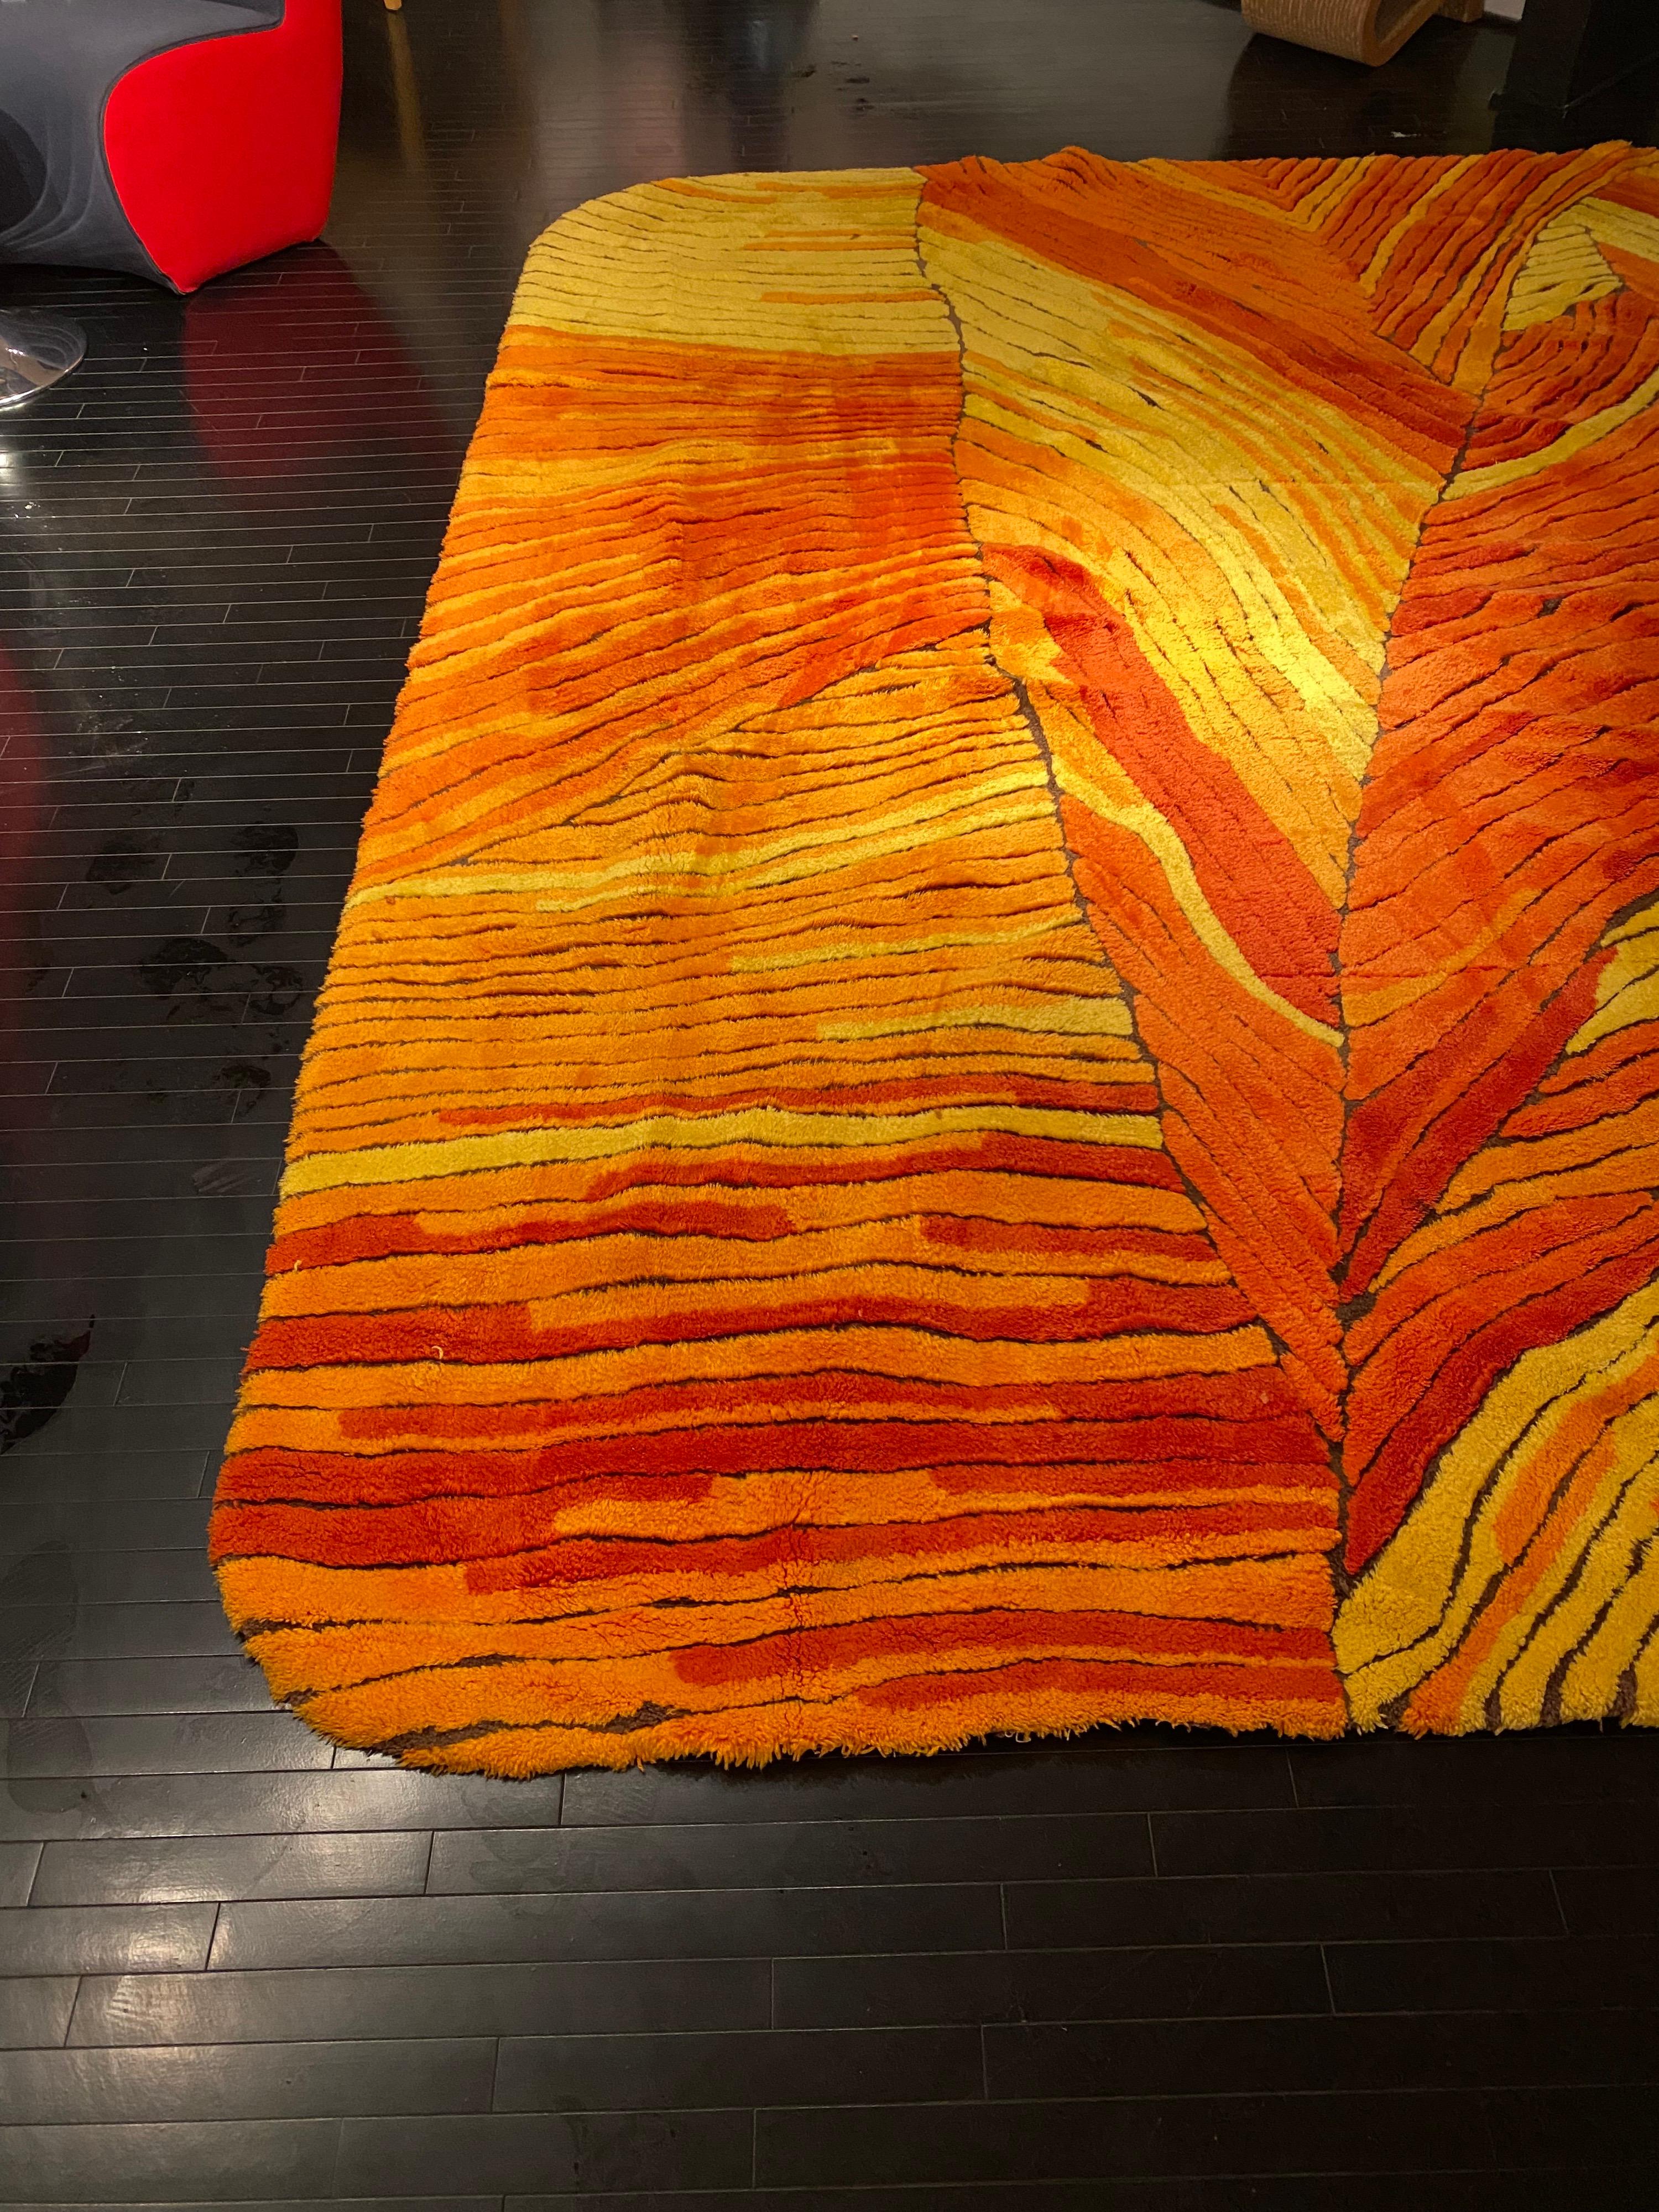 Edward Fields rug in shades of yellows and oranges. Custom Design for the Ponderosa Steak Houses Corporate Offices. Colors are bright and nap and pile in great shape. Rounded soft corners. 115